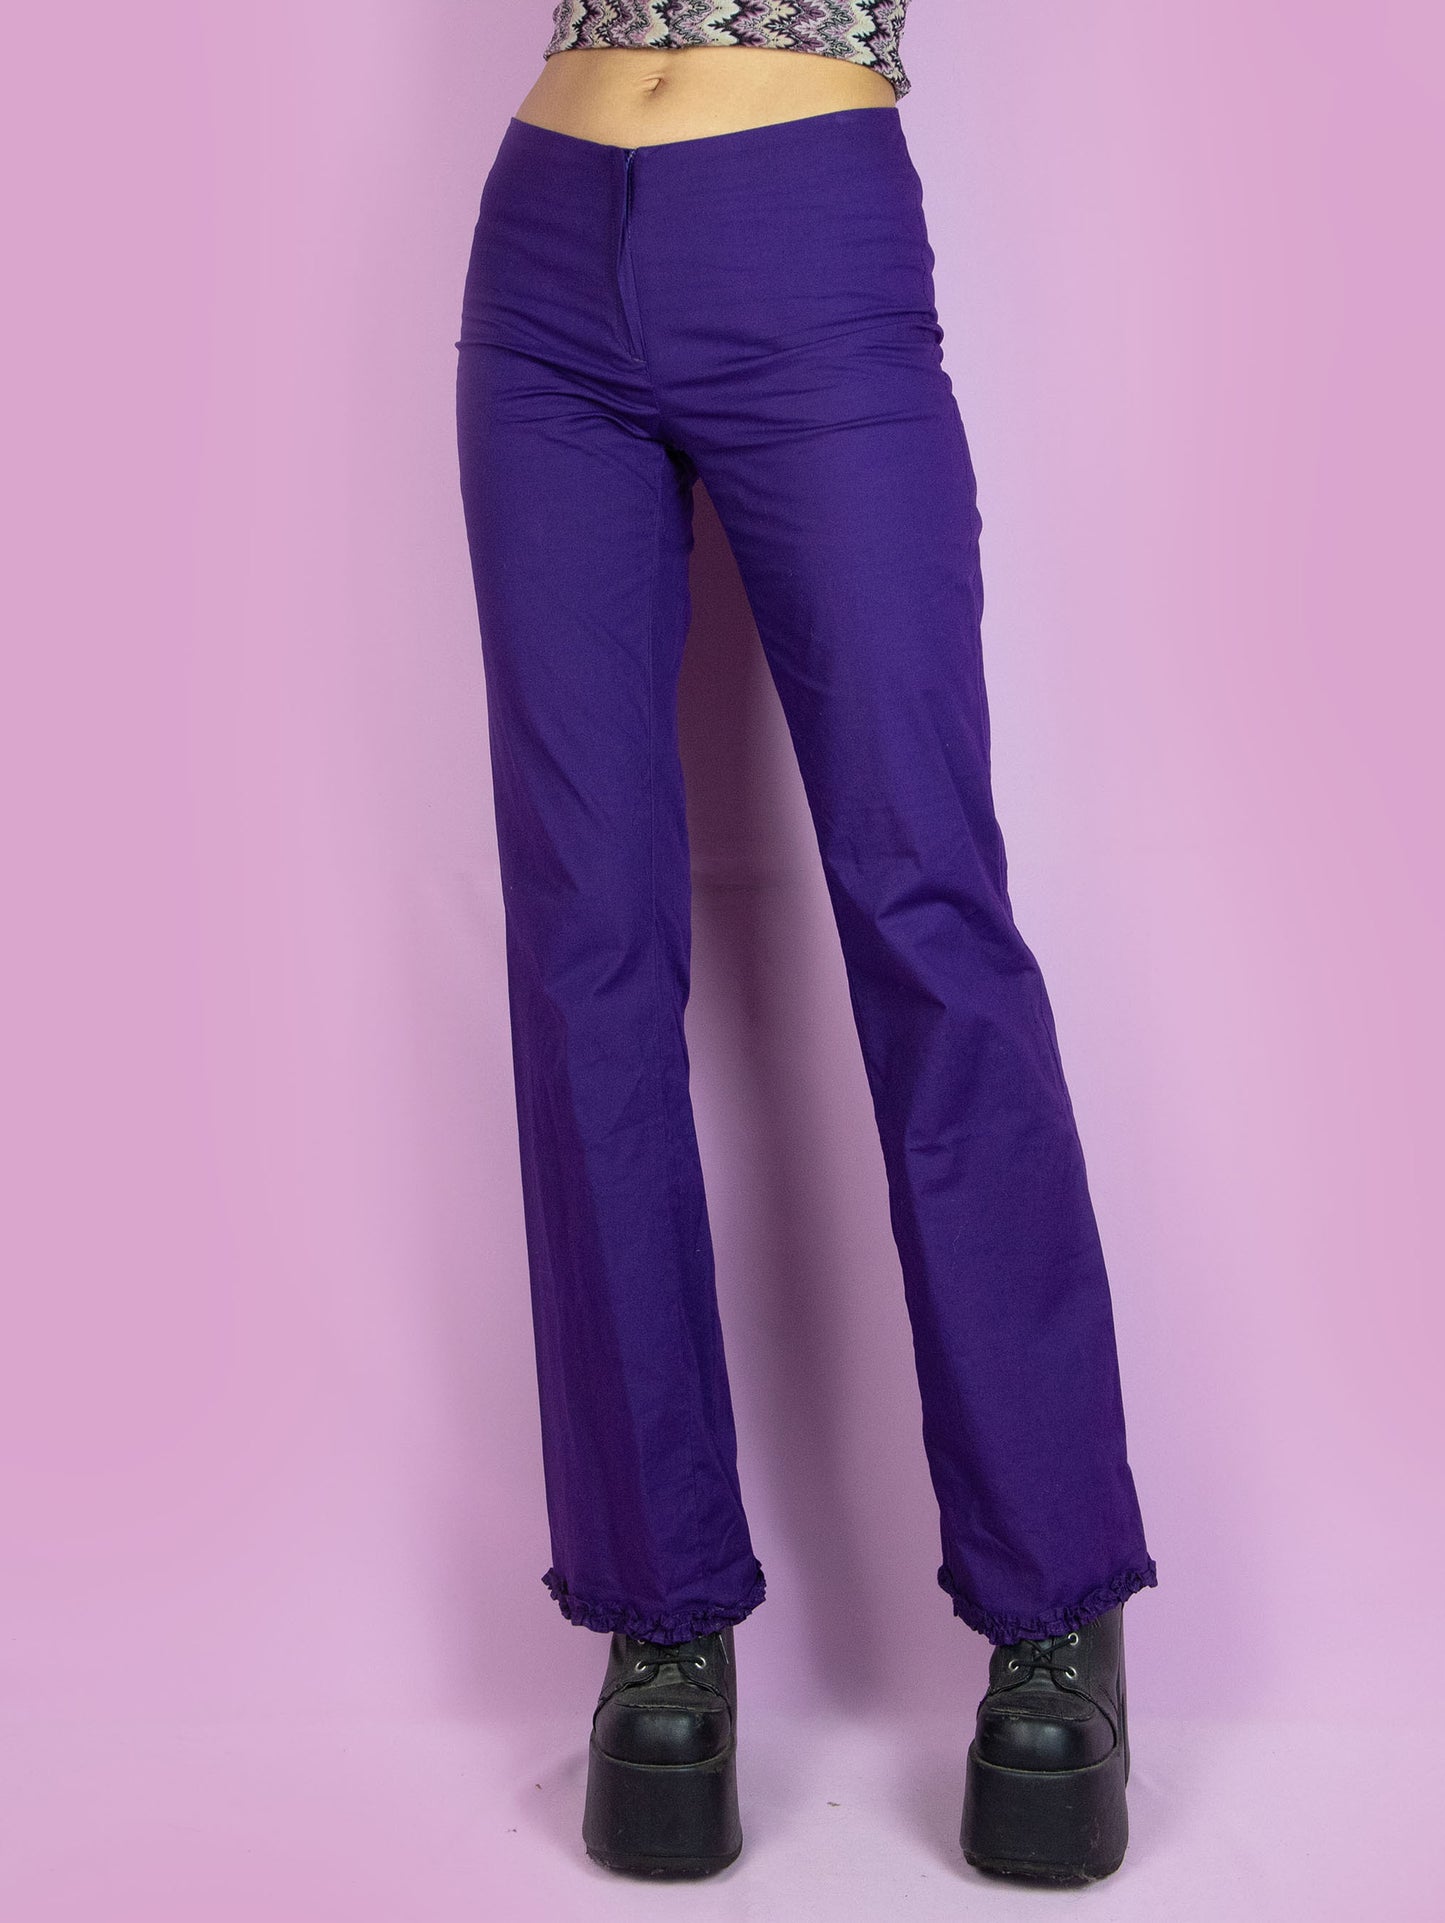 The Vintage 90s Dark Purple Flare Pants are mid-rise purple pants, slightly elastic and flared, with a front zipper closure and a gathered ruffle detail at the hem. Boho retro 1990s trousers.